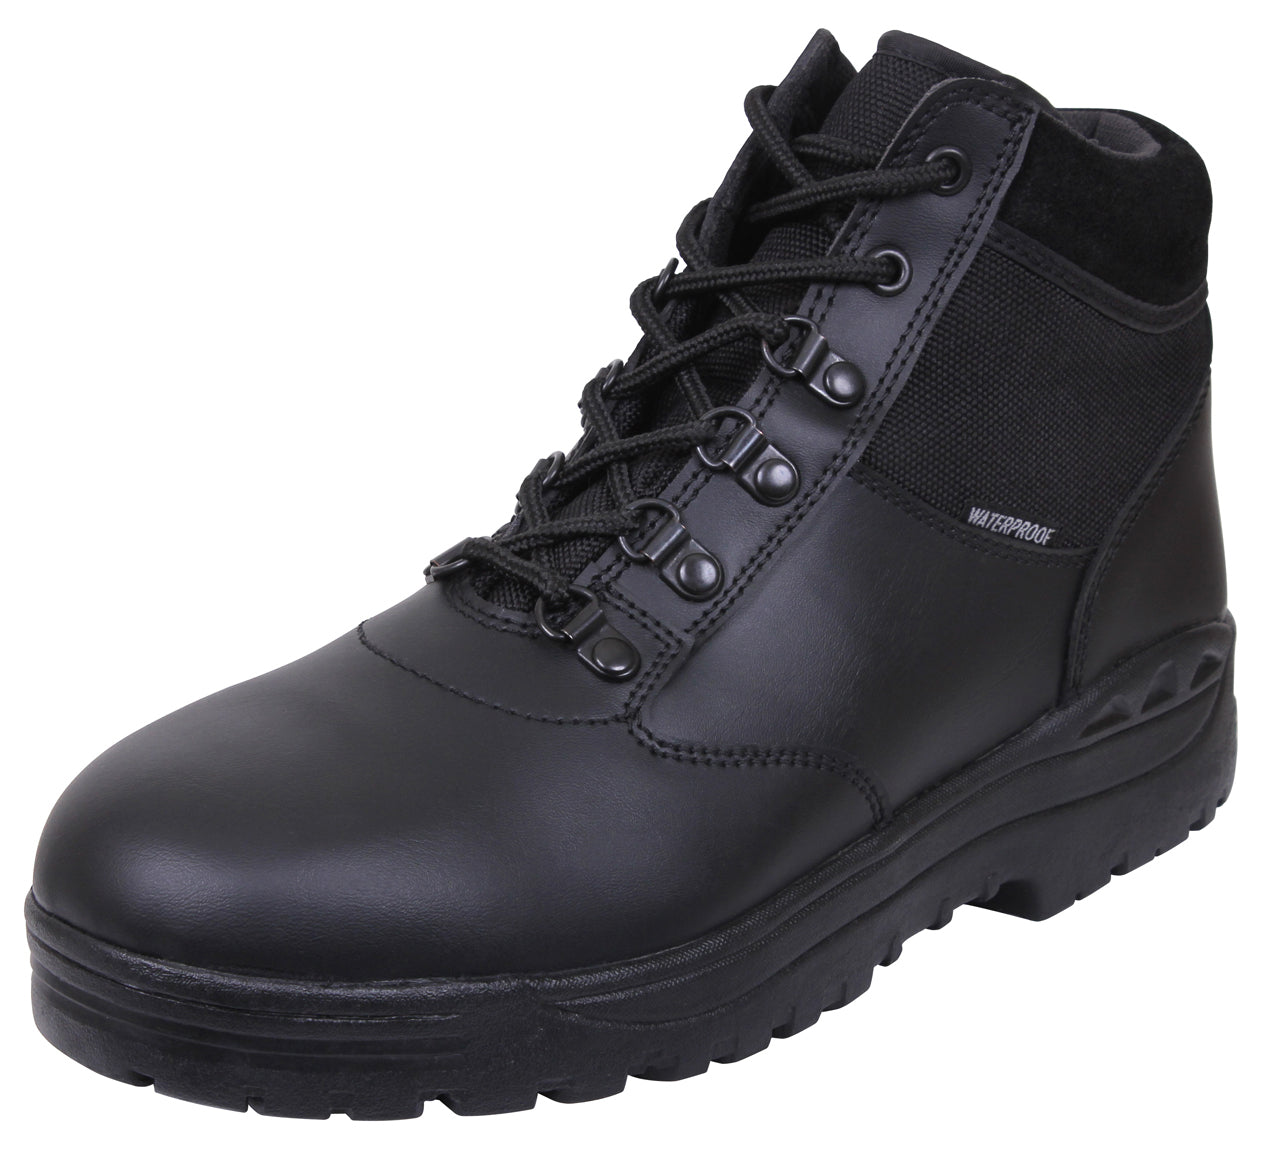 Mens Black GI Style Forced Entry Waterproof Tactical Boots by Rothco